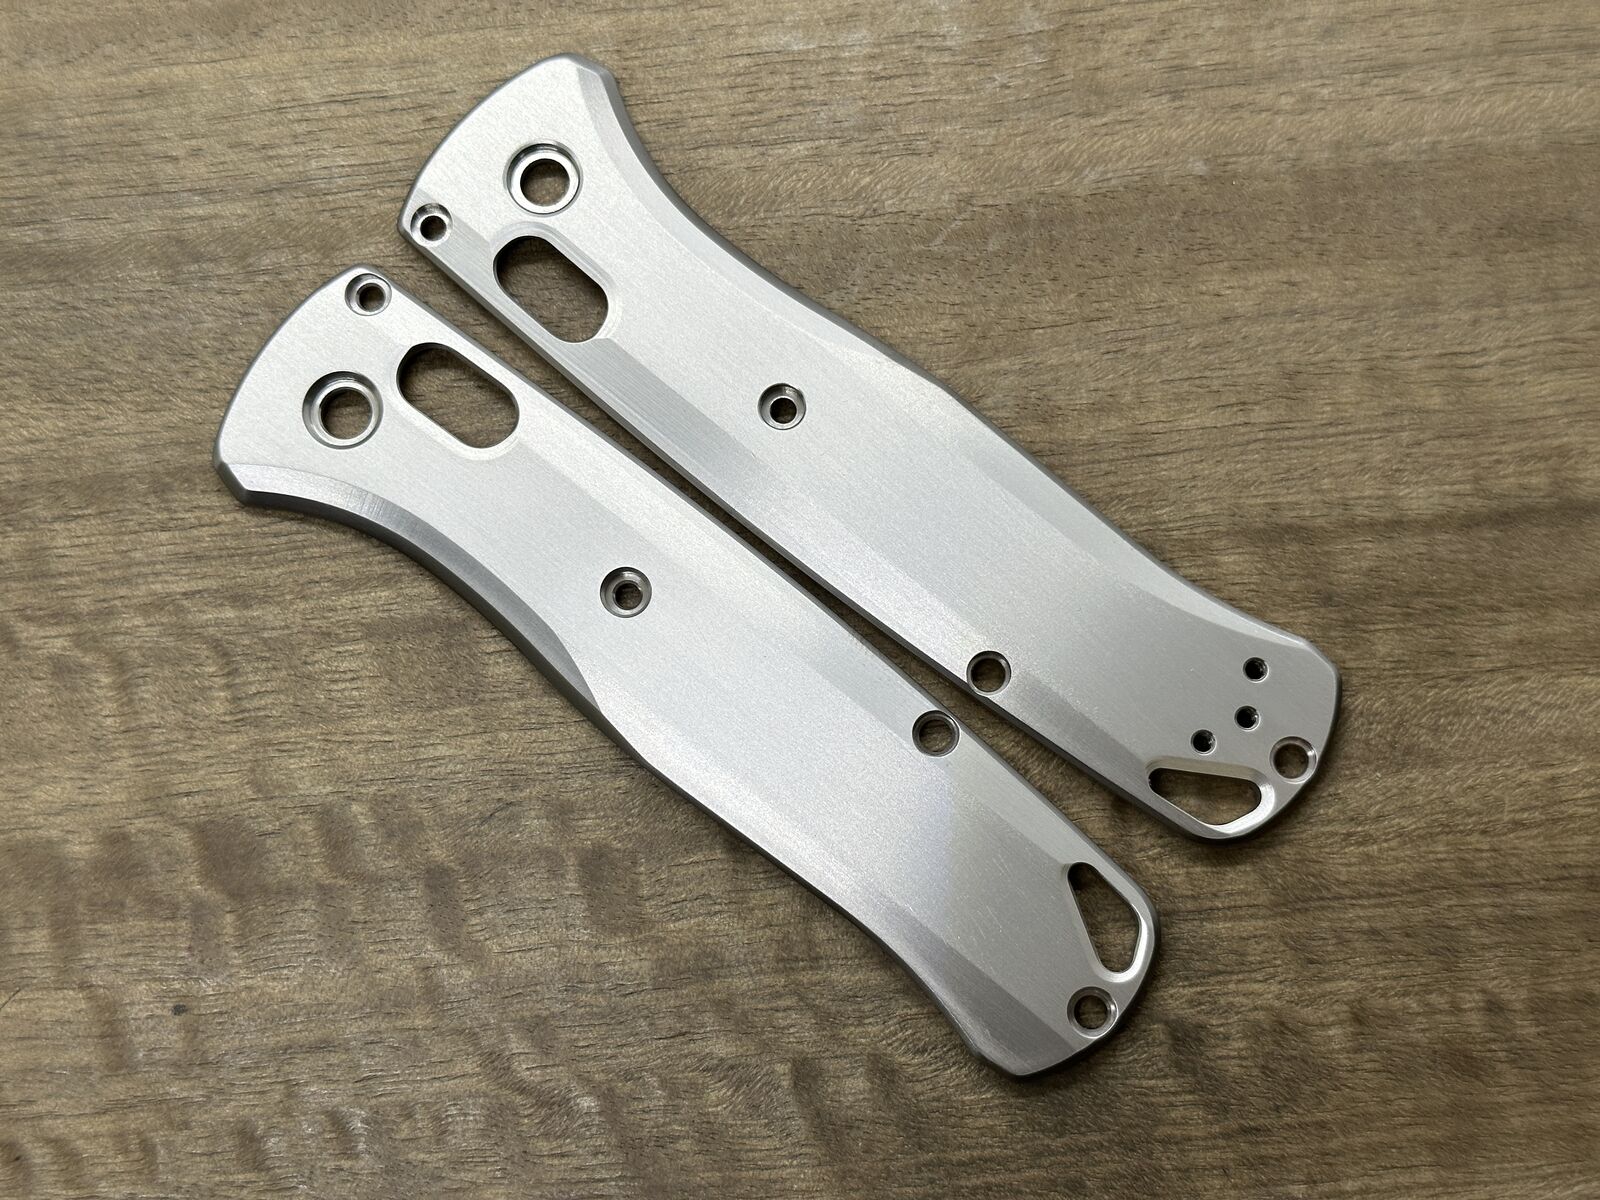 Brushed Titanium Scales for Benchmade Bugout 535